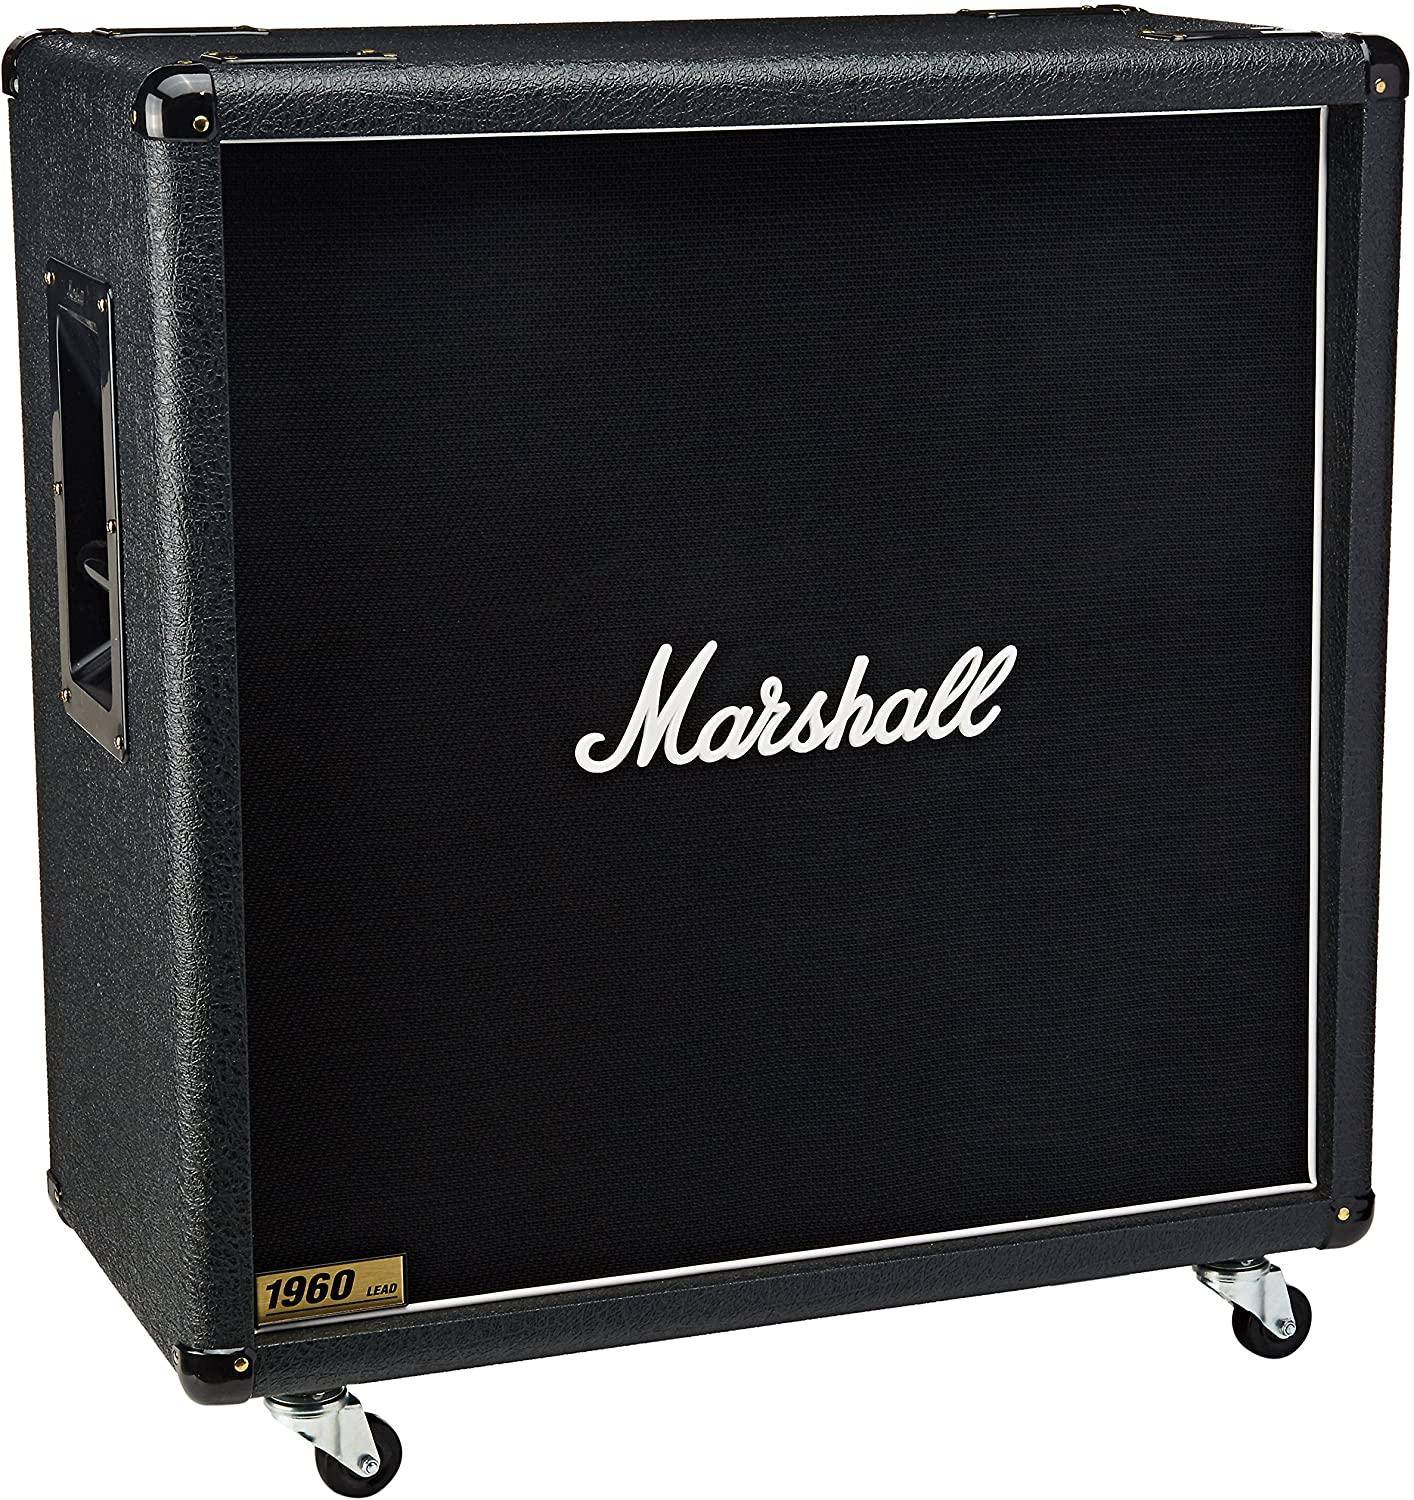 Marshall 1960A 300W 4x12 Guitar Extension Angled Cabinet zoom image